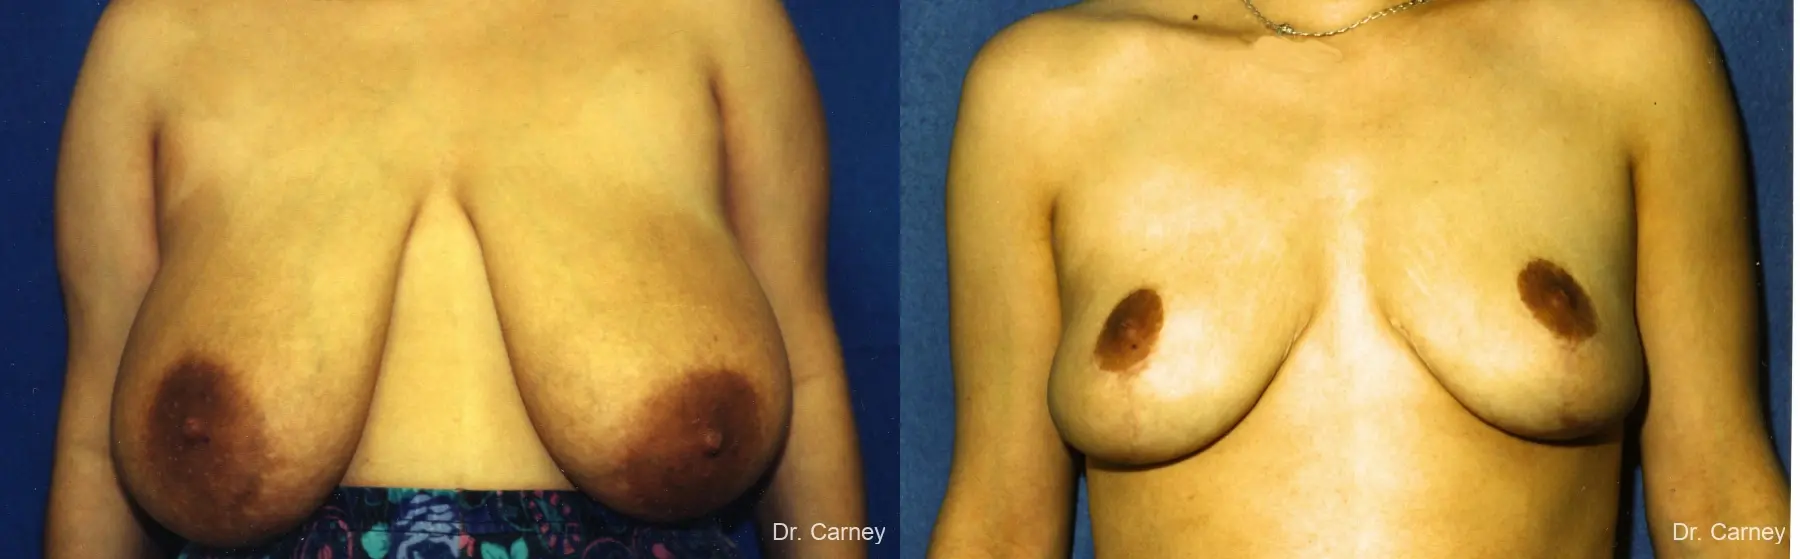 Virginia Beach Breast Lift 1191 - Before and After 1